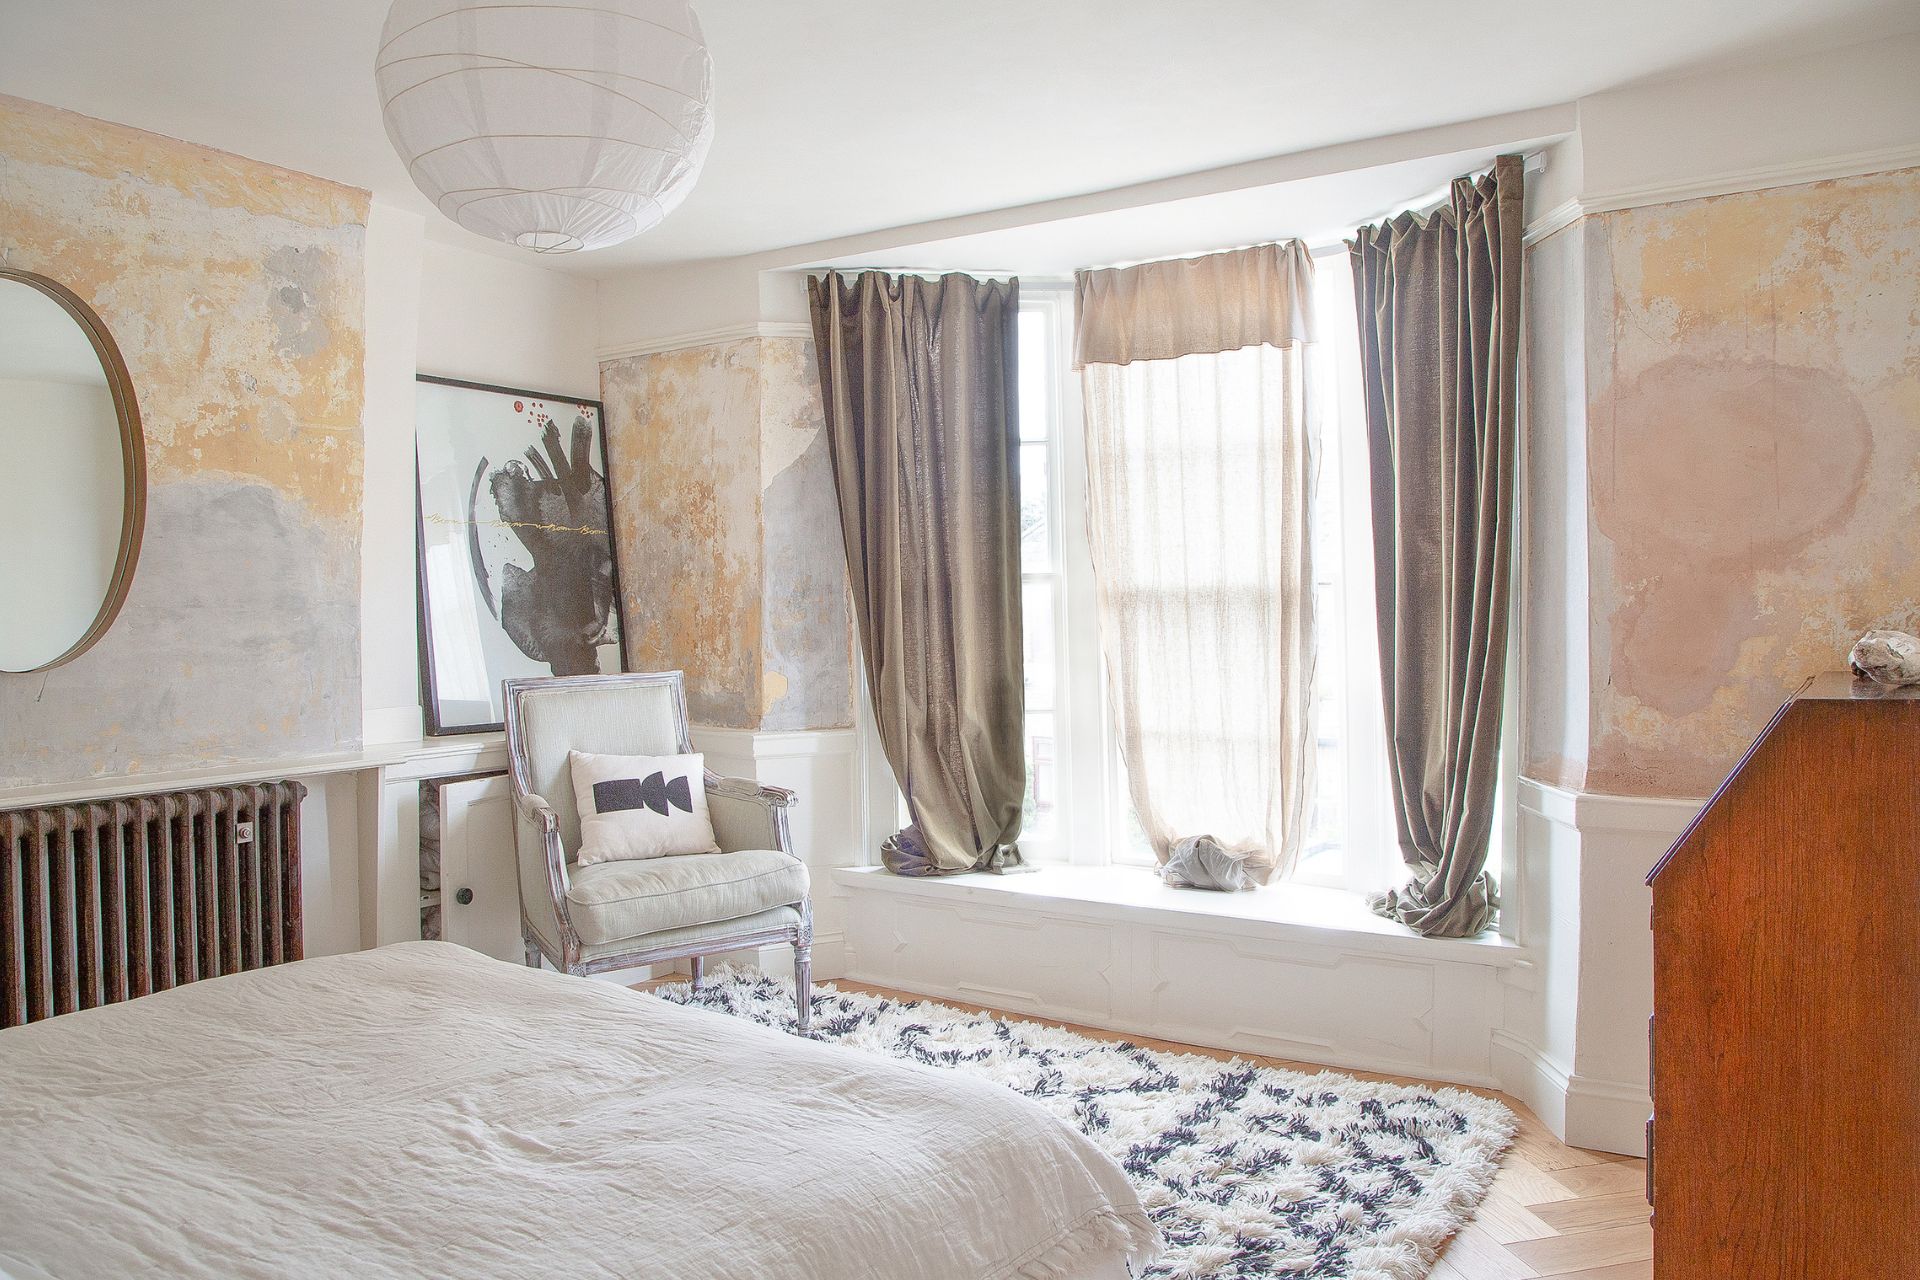 Modern bedroom with a bay window, taupe curtains, a round gold mirror and a wooden dresser.